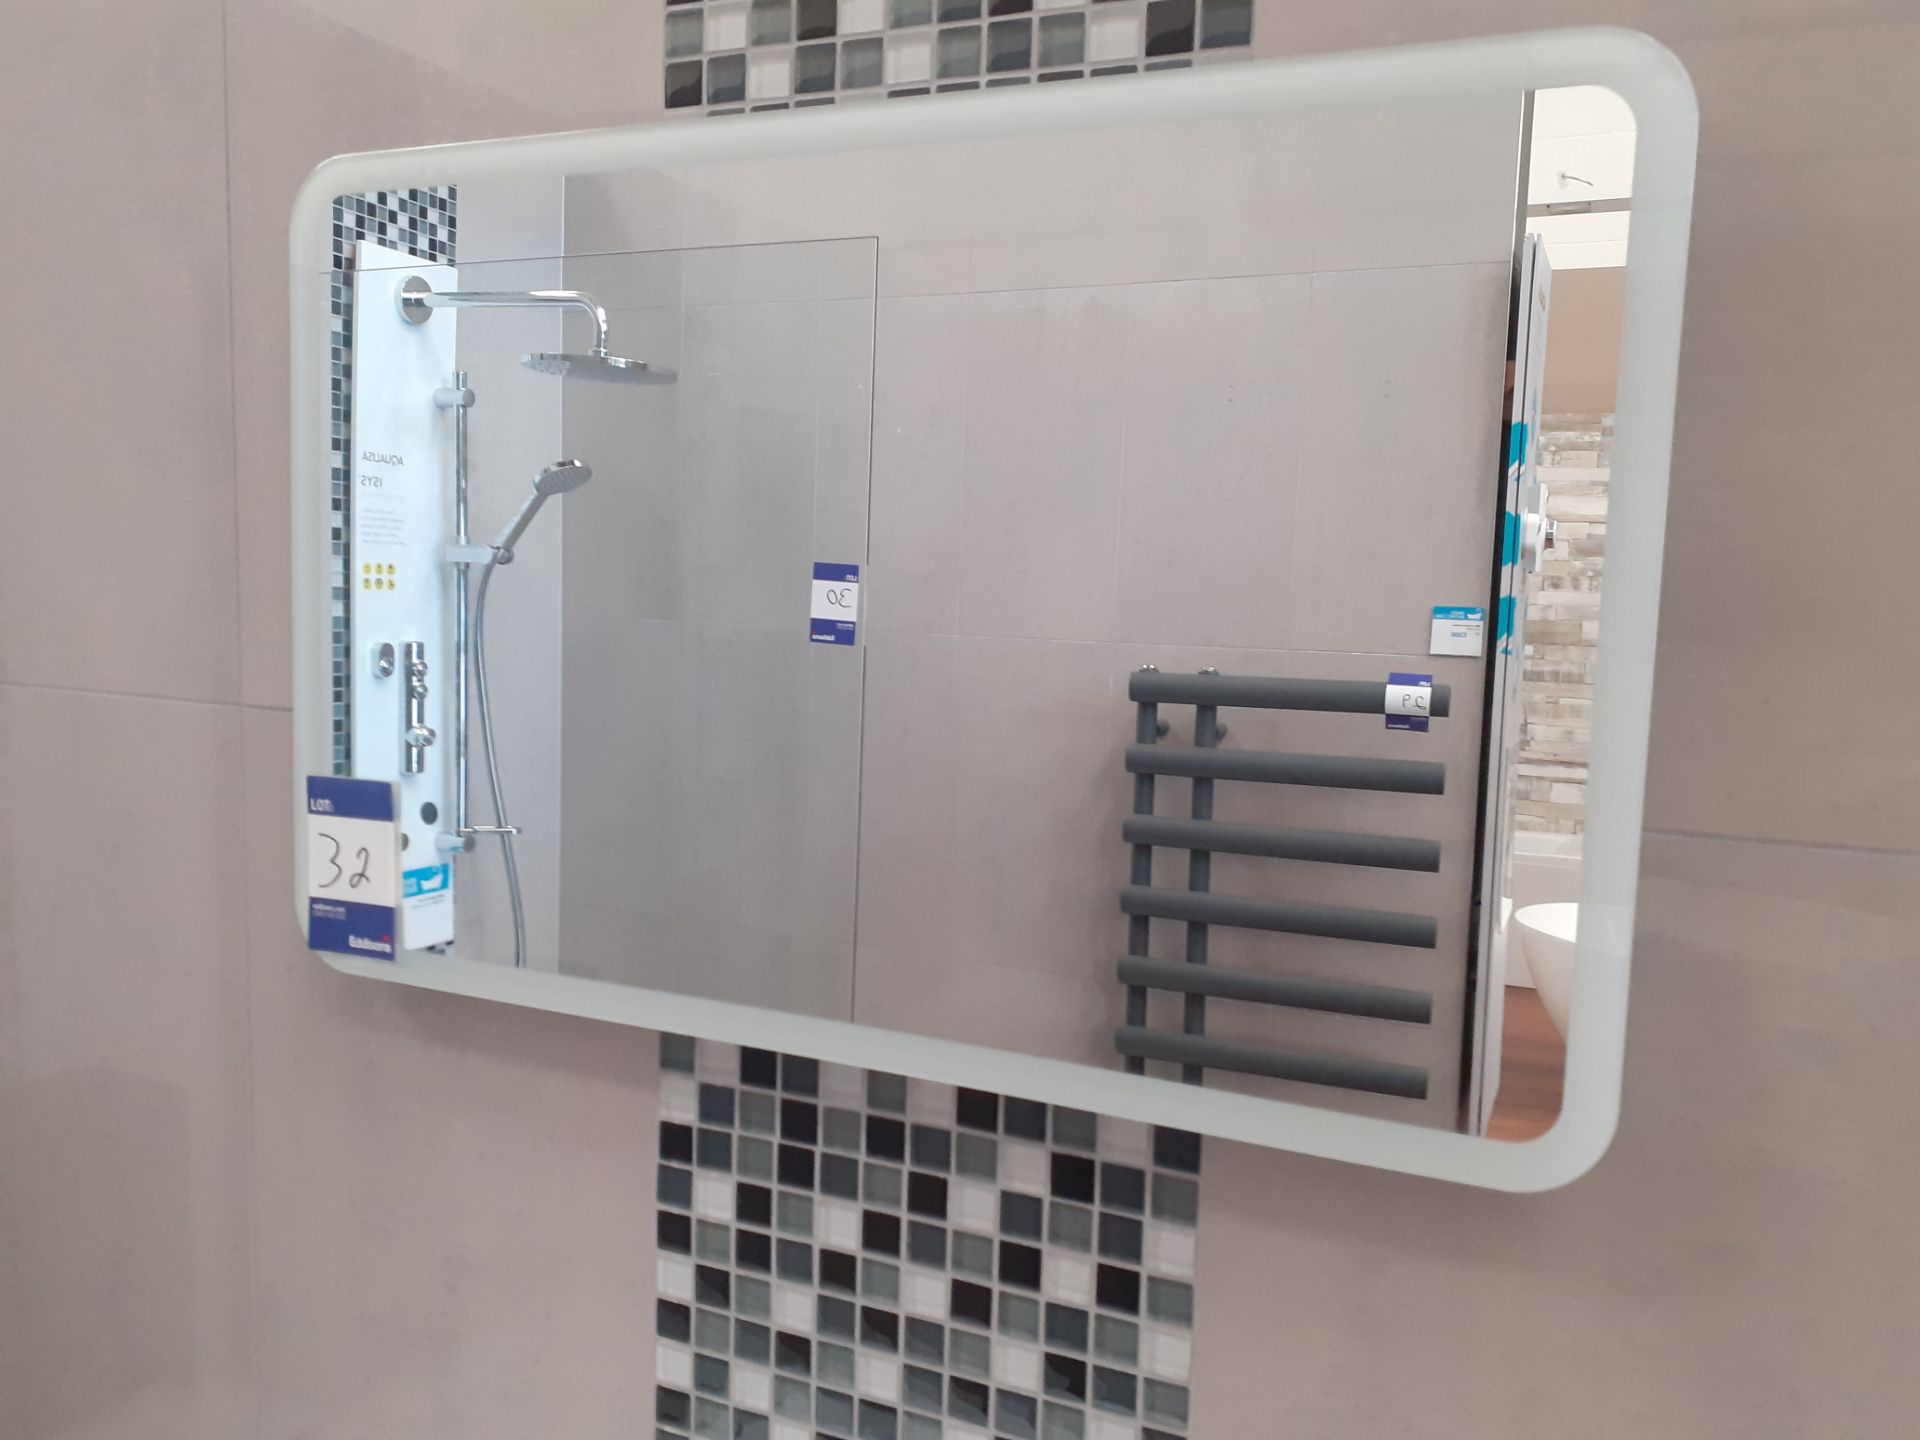 Illuminated Mirror - To be disconnected by a qualified tradesperson/electrician.